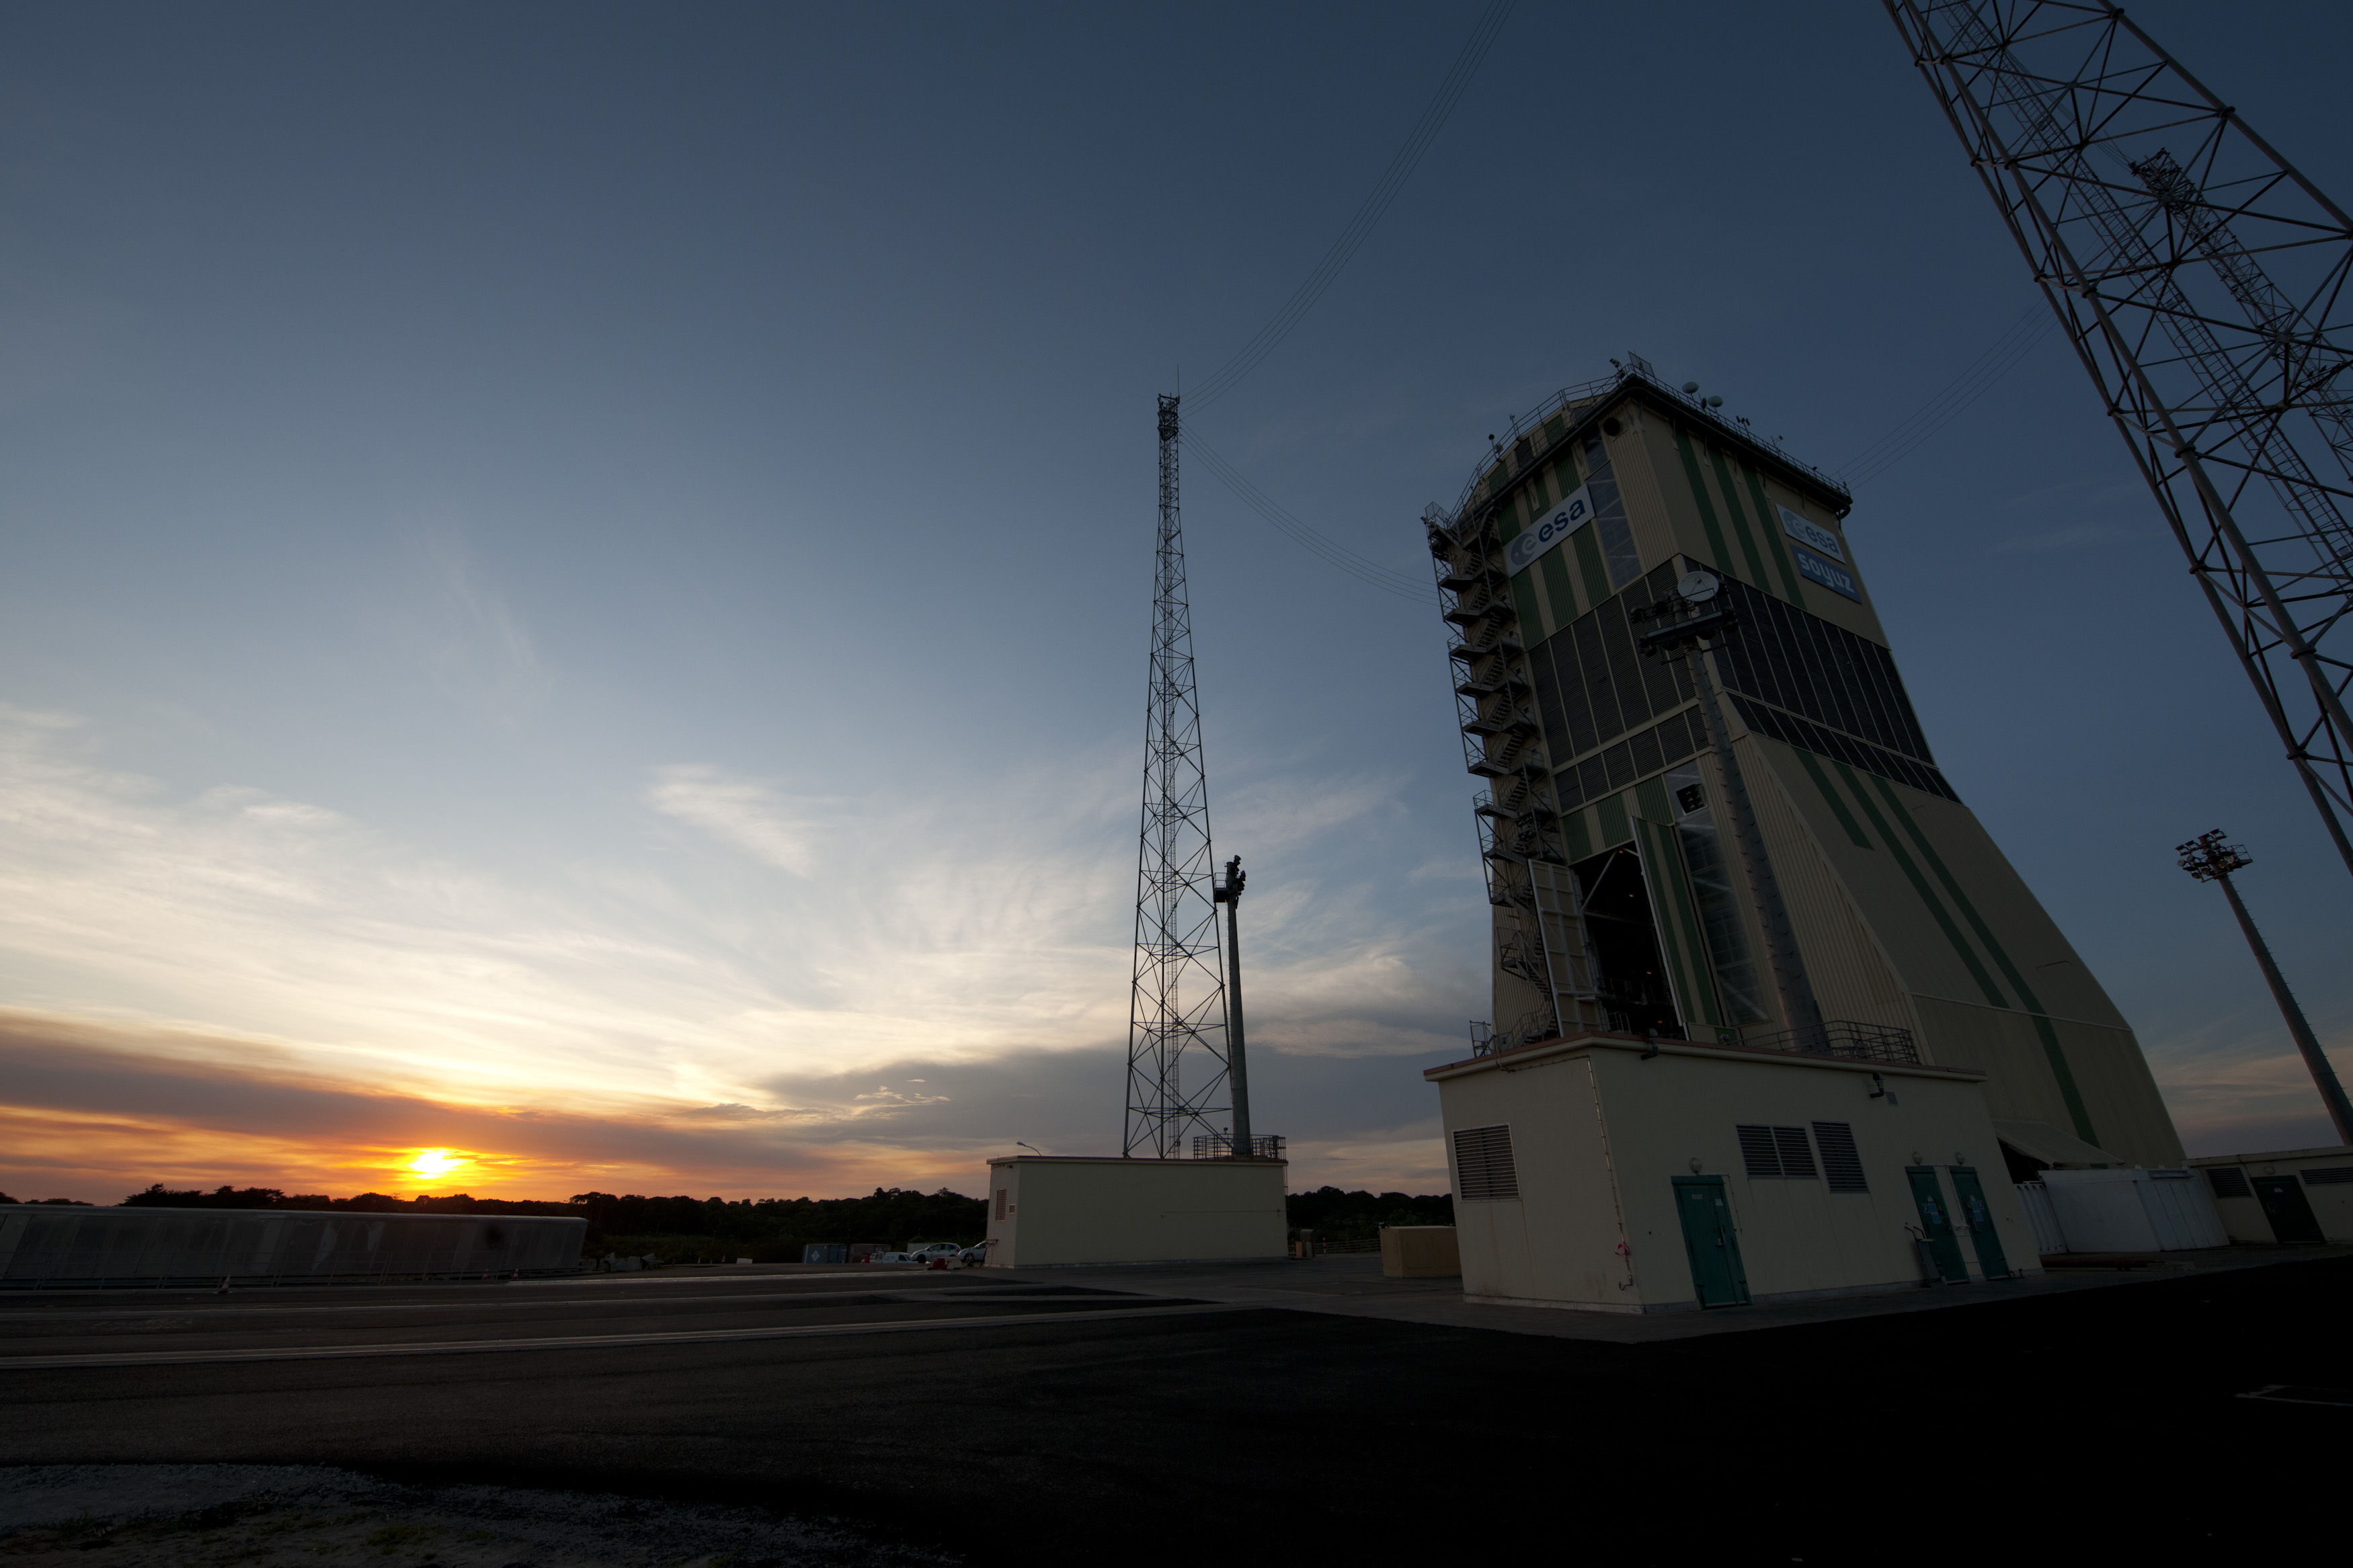 europes-spaceport-scheduled-3-launches-for-2012-with-first-launch-window-starting-on-feb-9